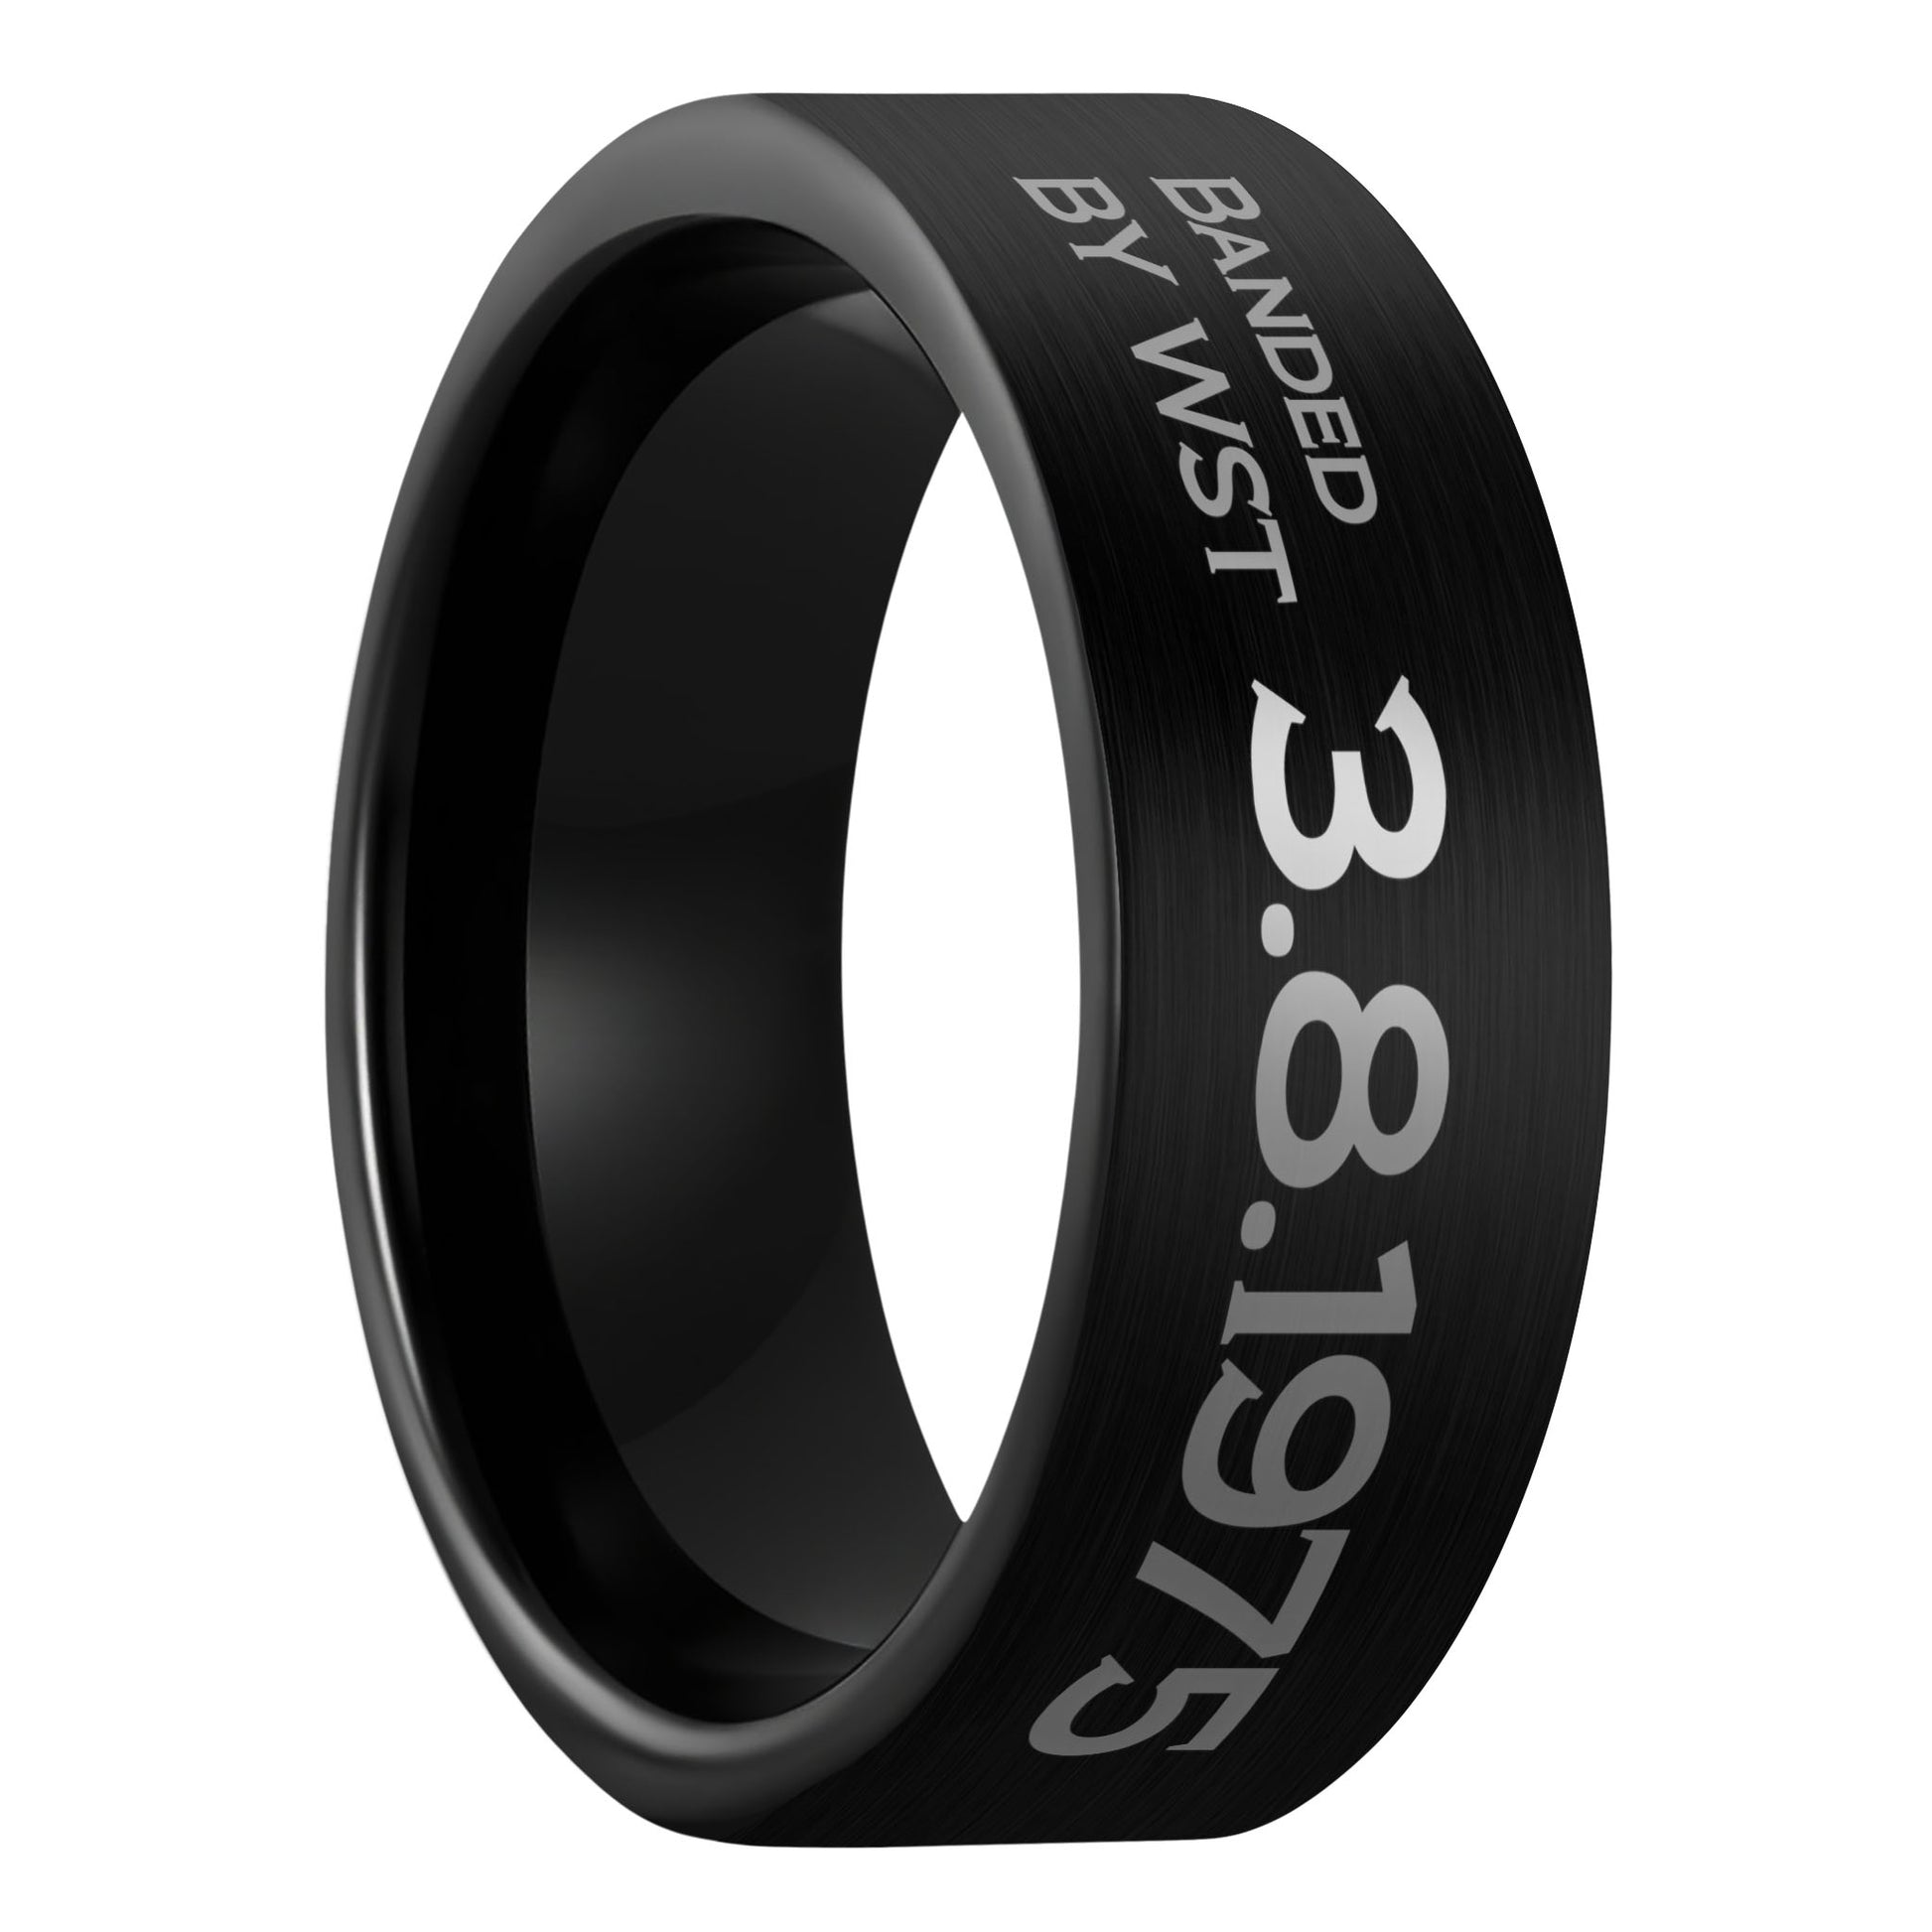 A duck band style custom engraved brushed black tungsten men's wedding band displayed on a plain white background.